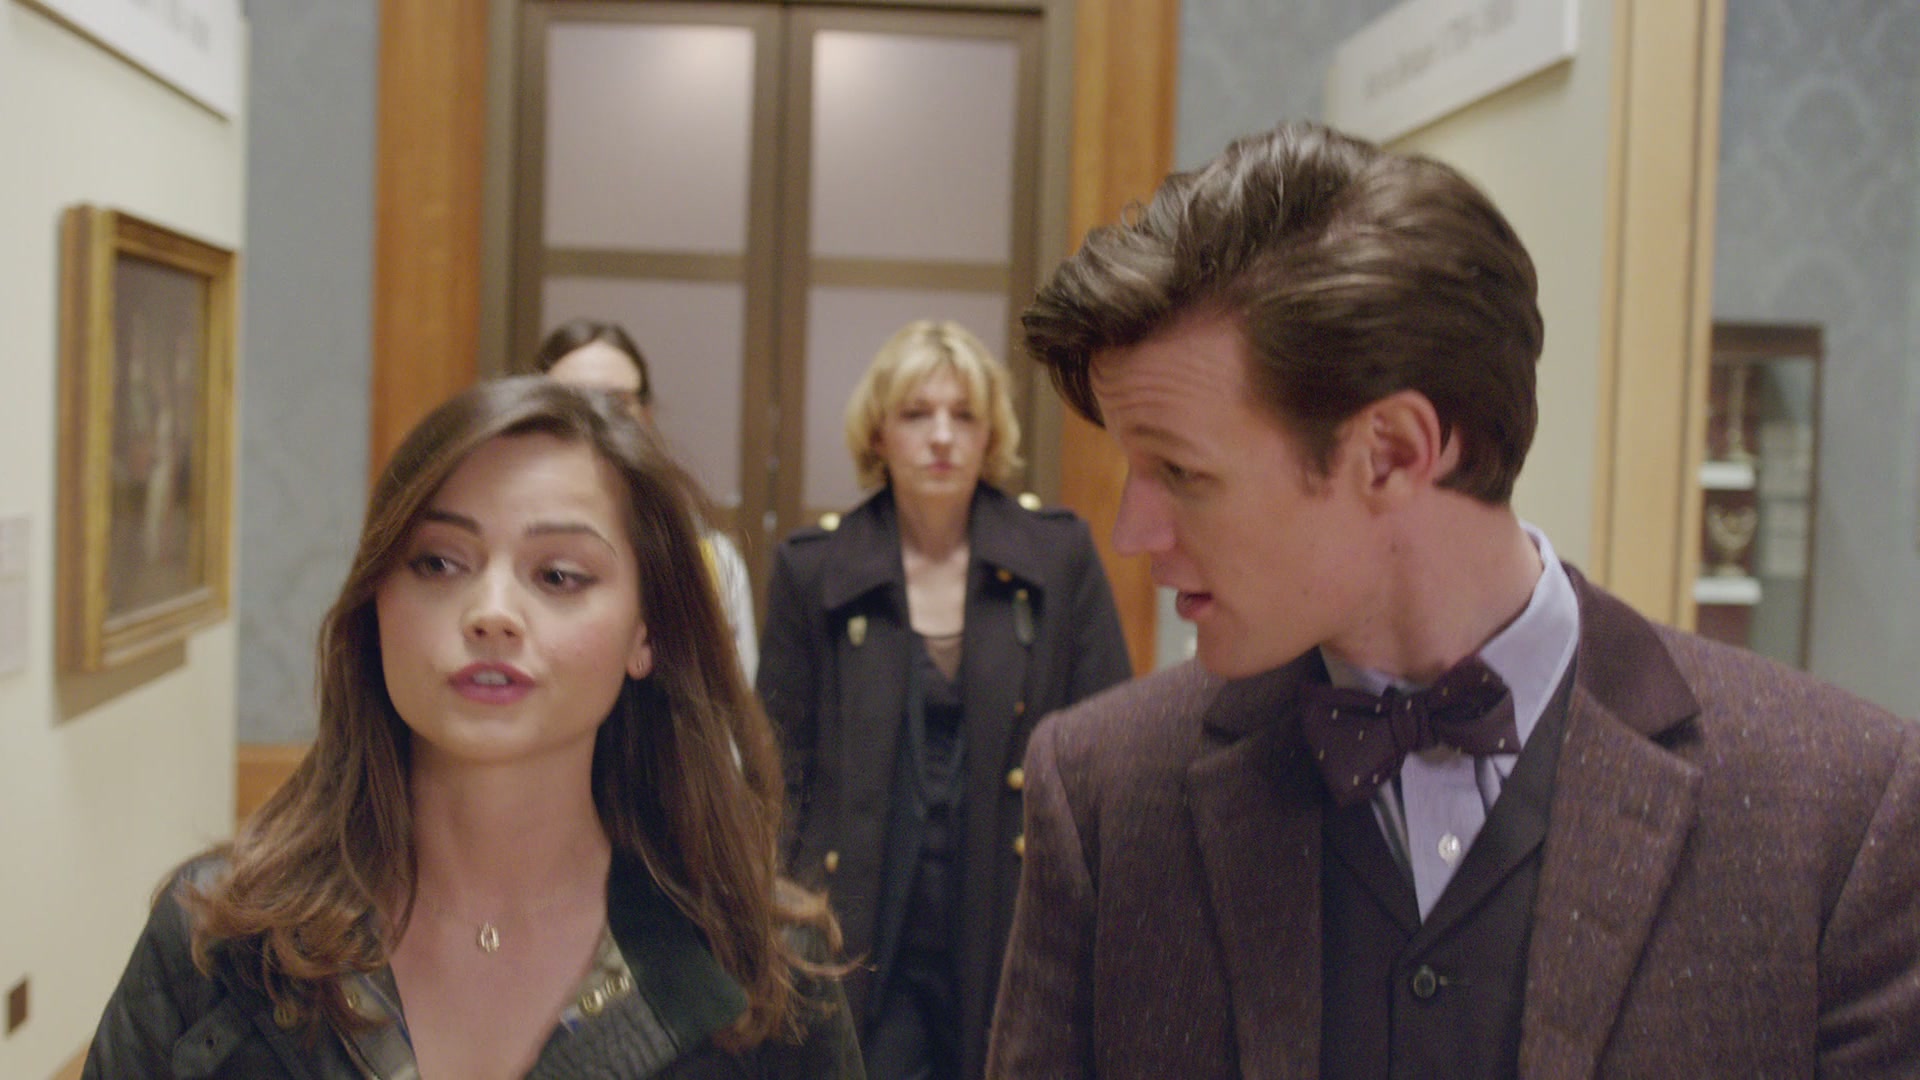 DayOfTheDoctor-Caps-0181.jpg